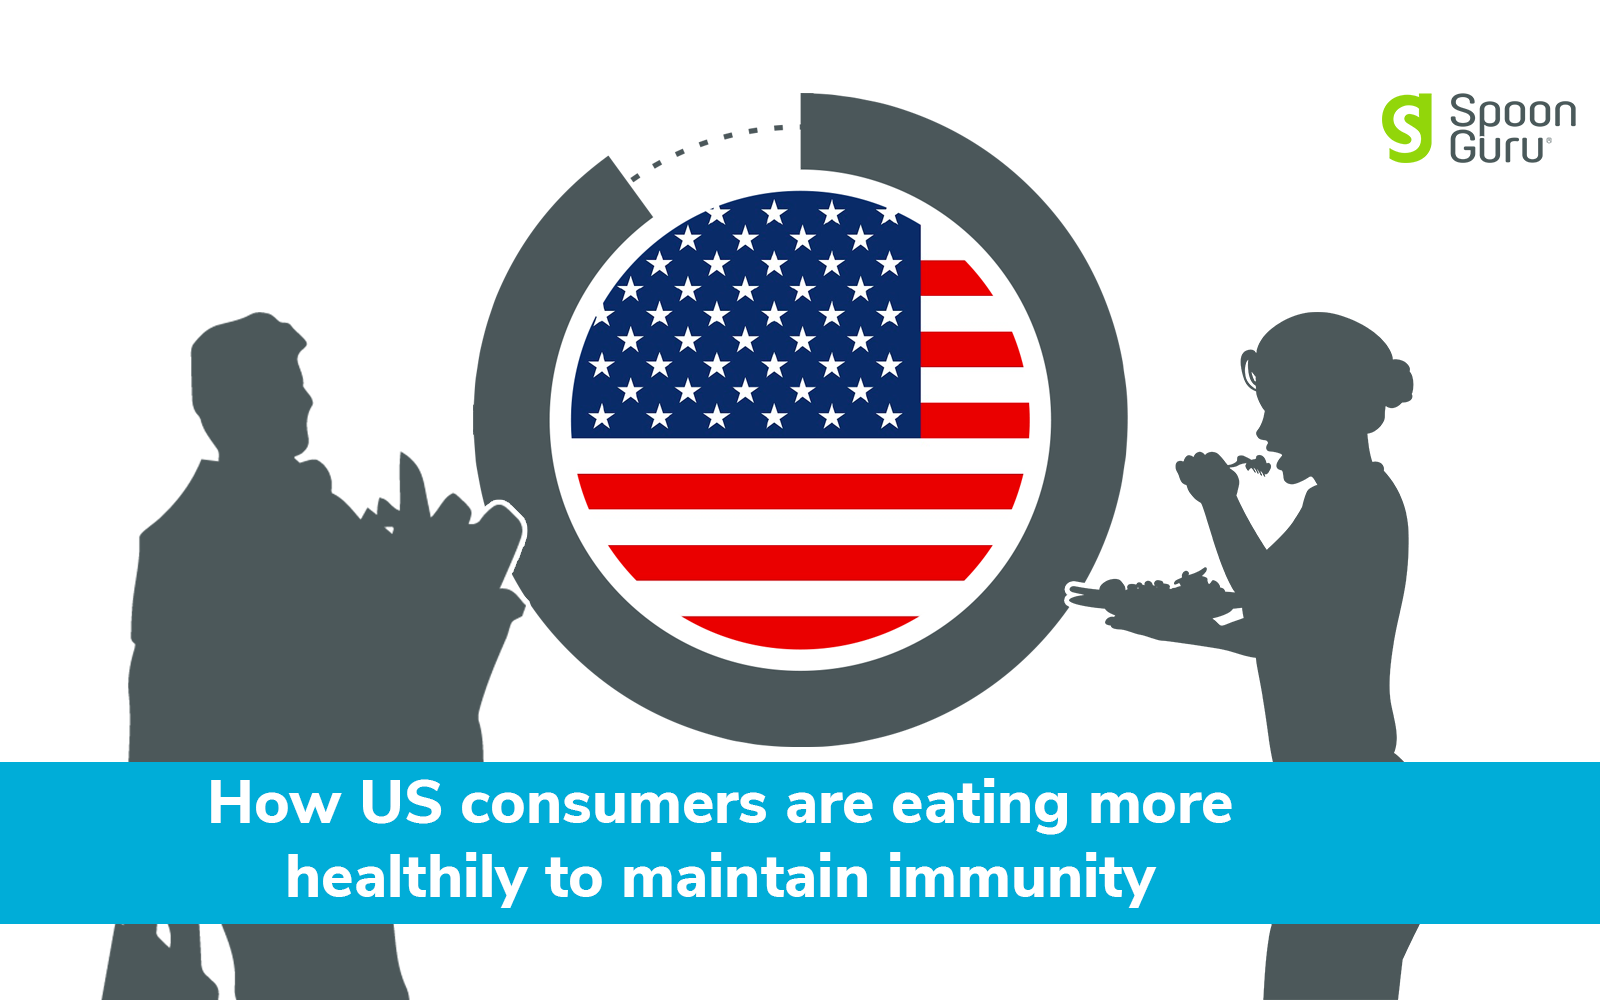 Americans call on supermarkets and government to steer healthy eating habits as new COVID-19 strain spreads